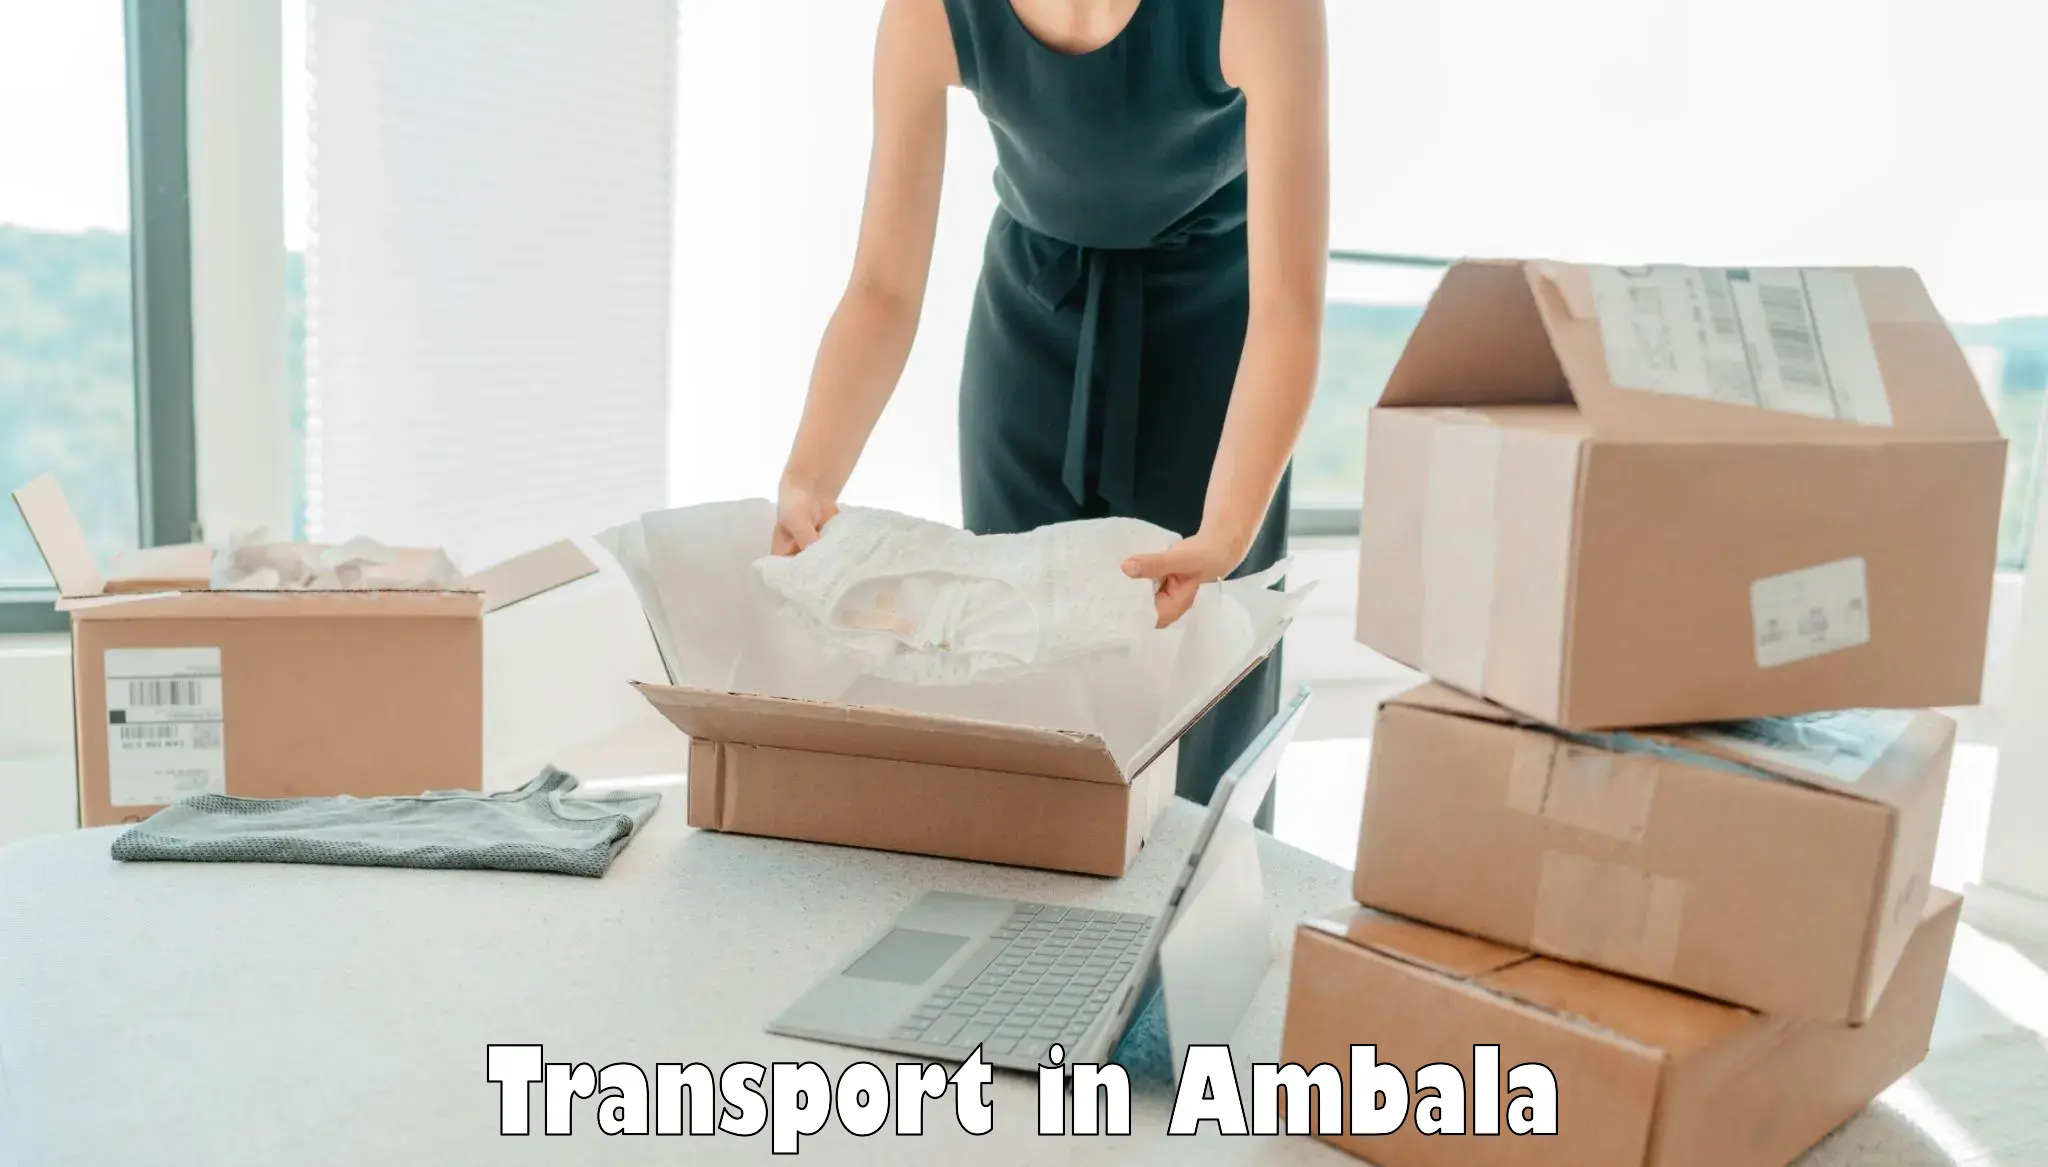 Parcel transport services in Ambala